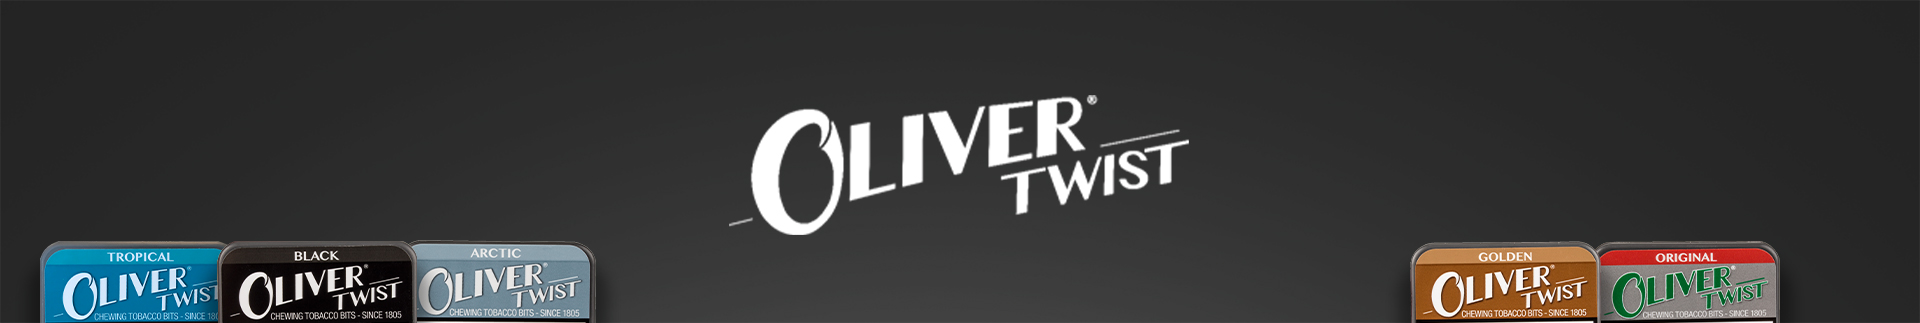 House of Oliver Twist